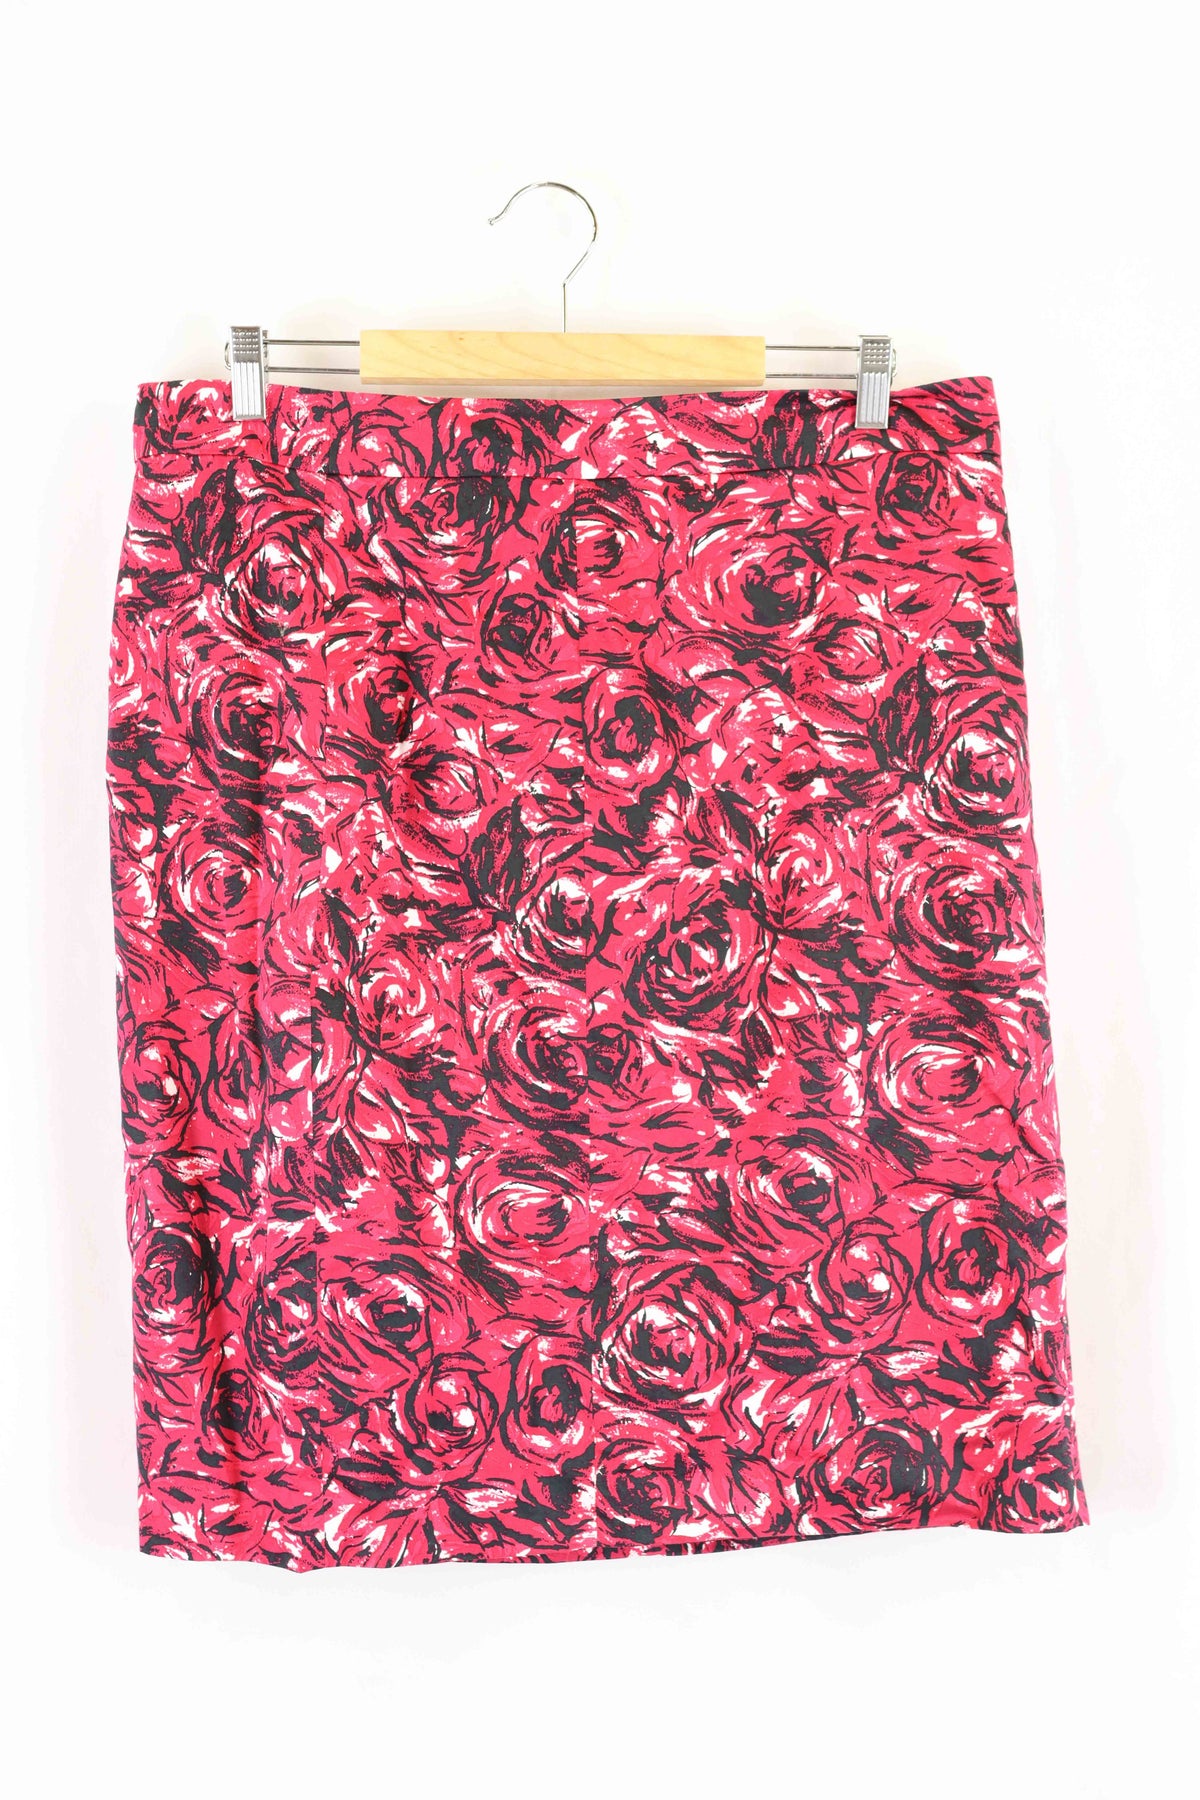 David Lawerence Red Floral Skirt 16